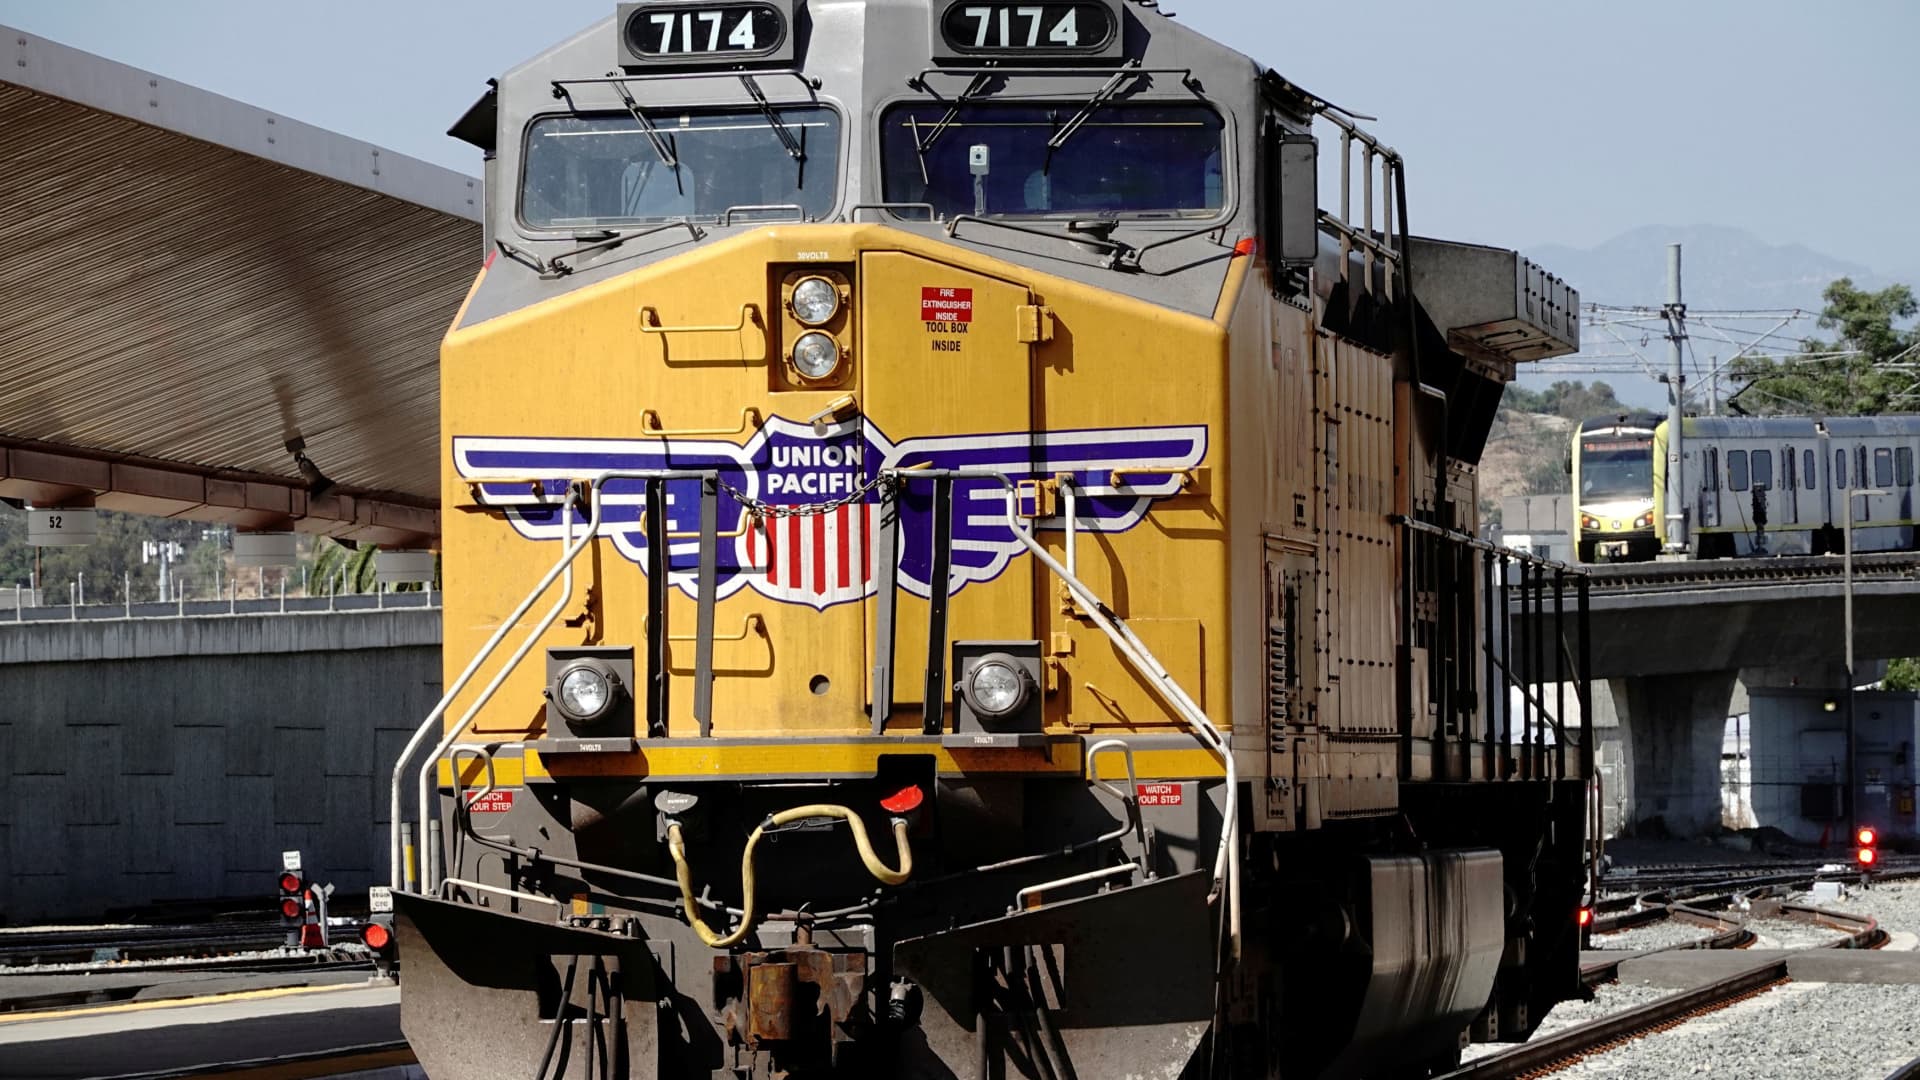 A GE AC4400CW diesel-electric locomotive in Union Pacific livery is seen near Union Station in Los Angeles, California, September 15, 2022.